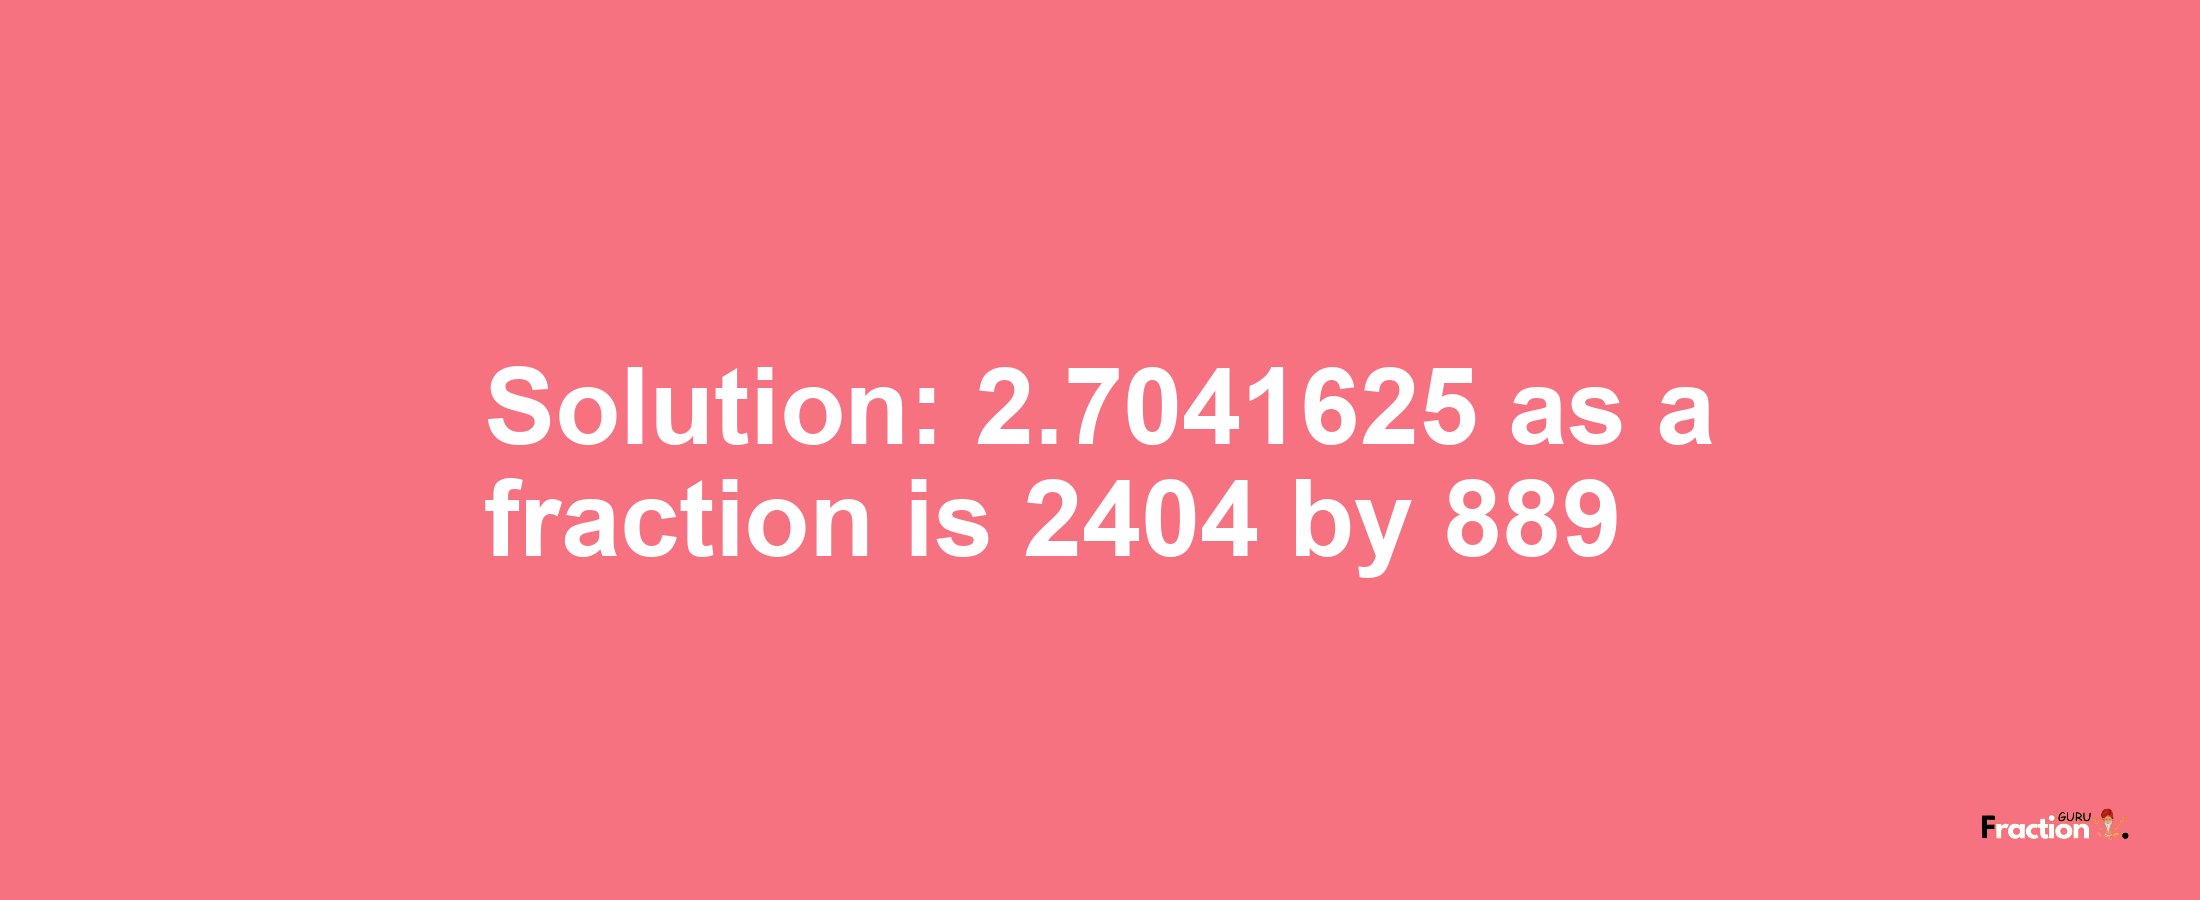 Solution:2.7041625 as a fraction is 2404/889